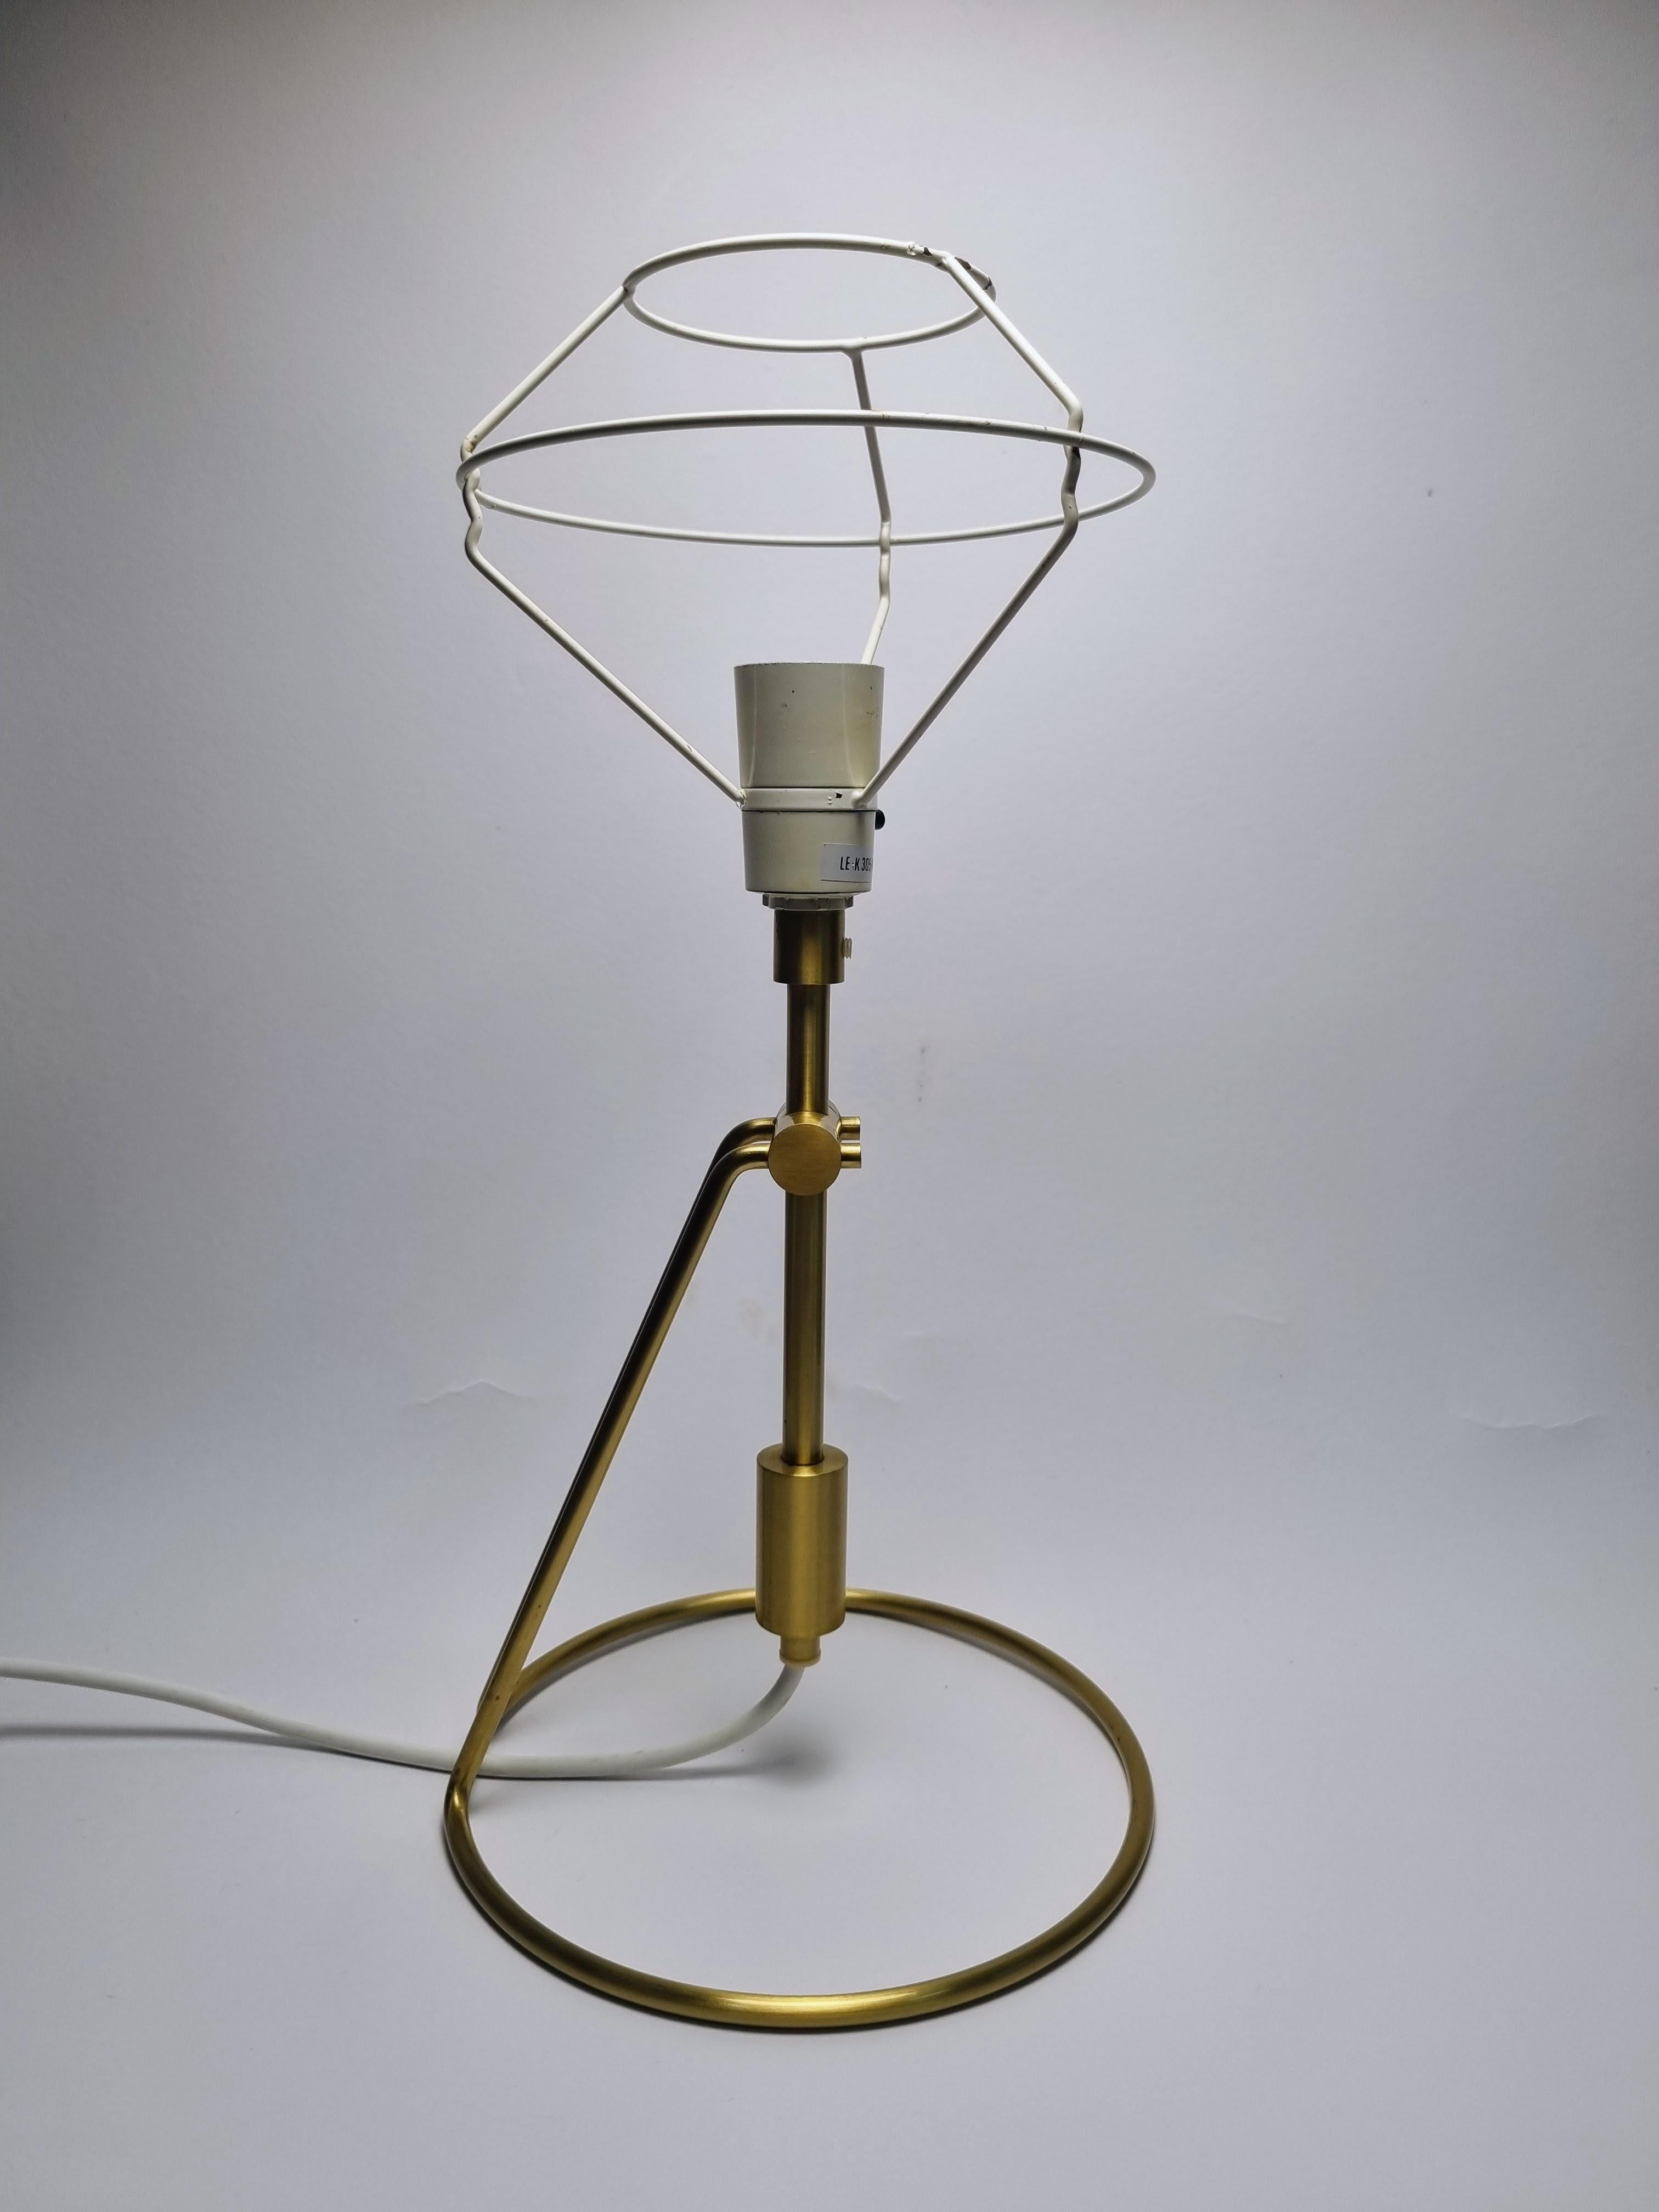 Le Klint model 305 designed by Peter white. 
This lamp can be used both as a table lamp and a wall lamp. 
It is made of brass and comes with an original le klimt lampshade holder, but without a lampshade.
Cable fitted with EU plug.